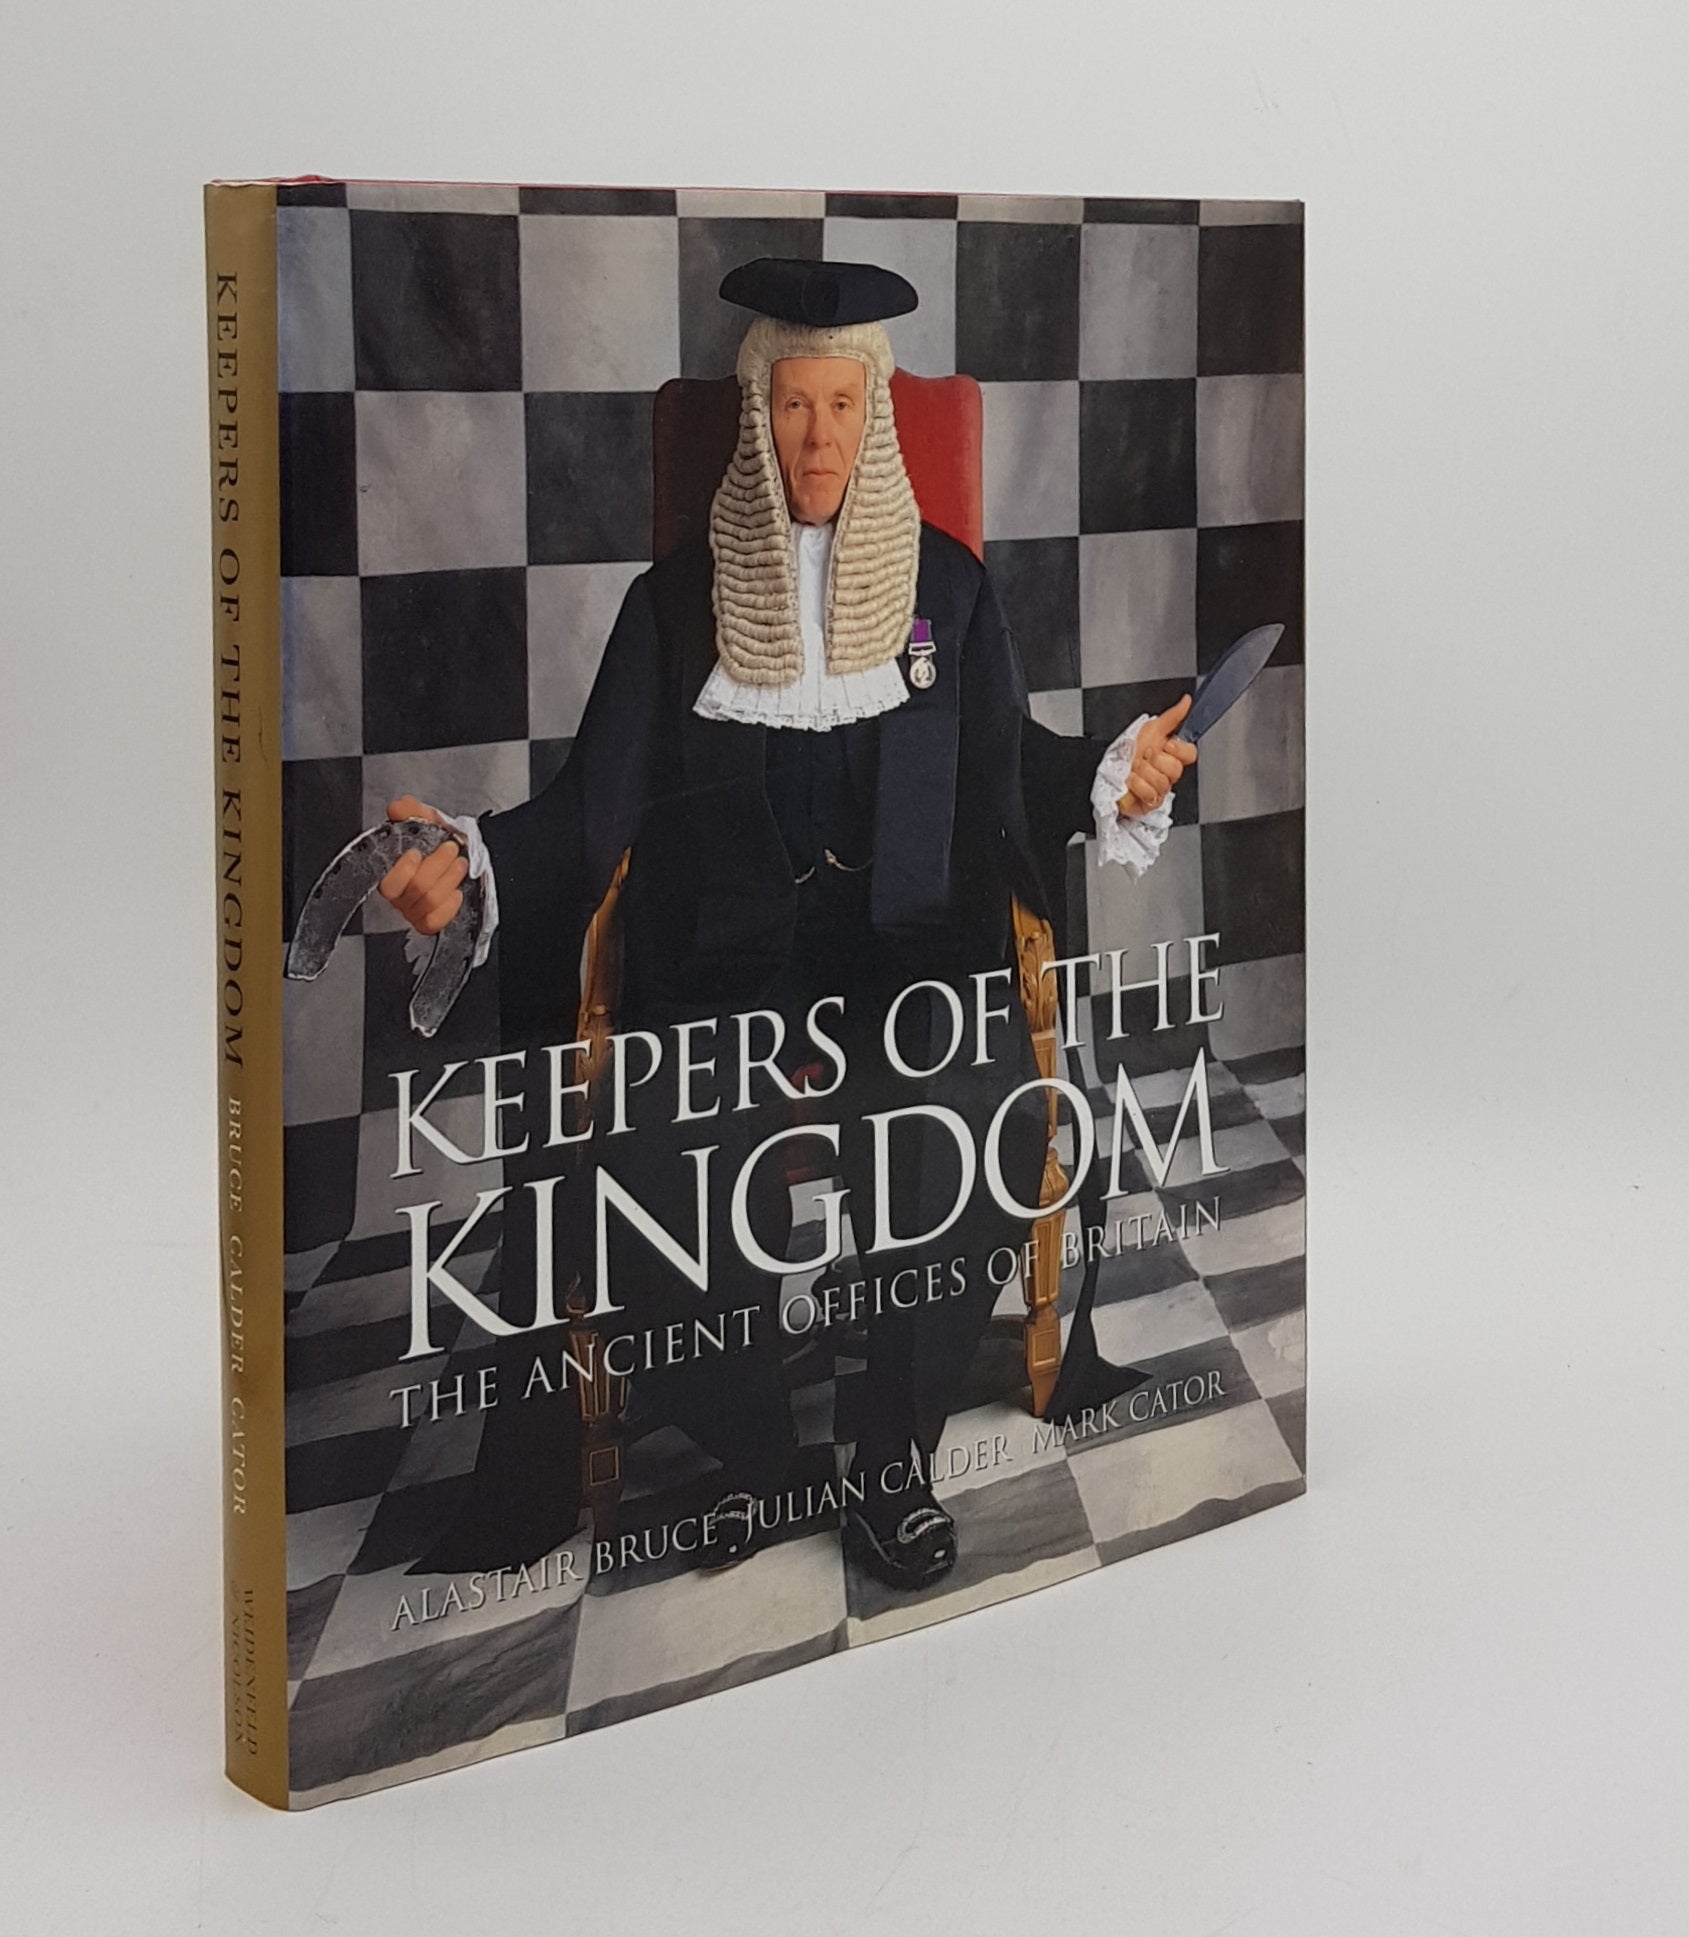 BRUCE Alastair, CALDER Julian & CATOR Mark - Keepers of the Kingdom the Ancient Offices of Britain